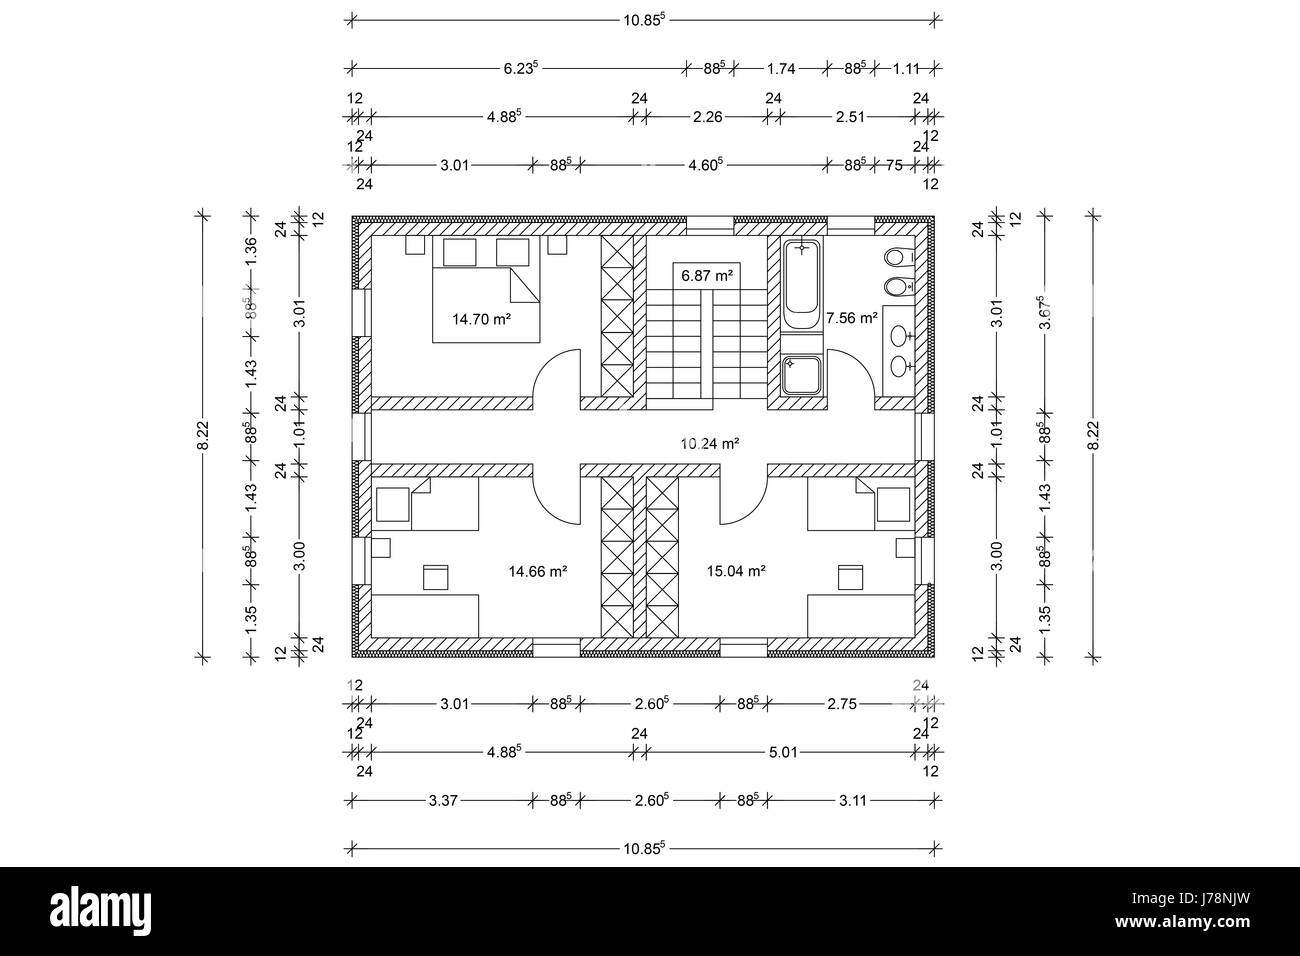 Floor plan of house as architectural drawing from architect Stock Photo